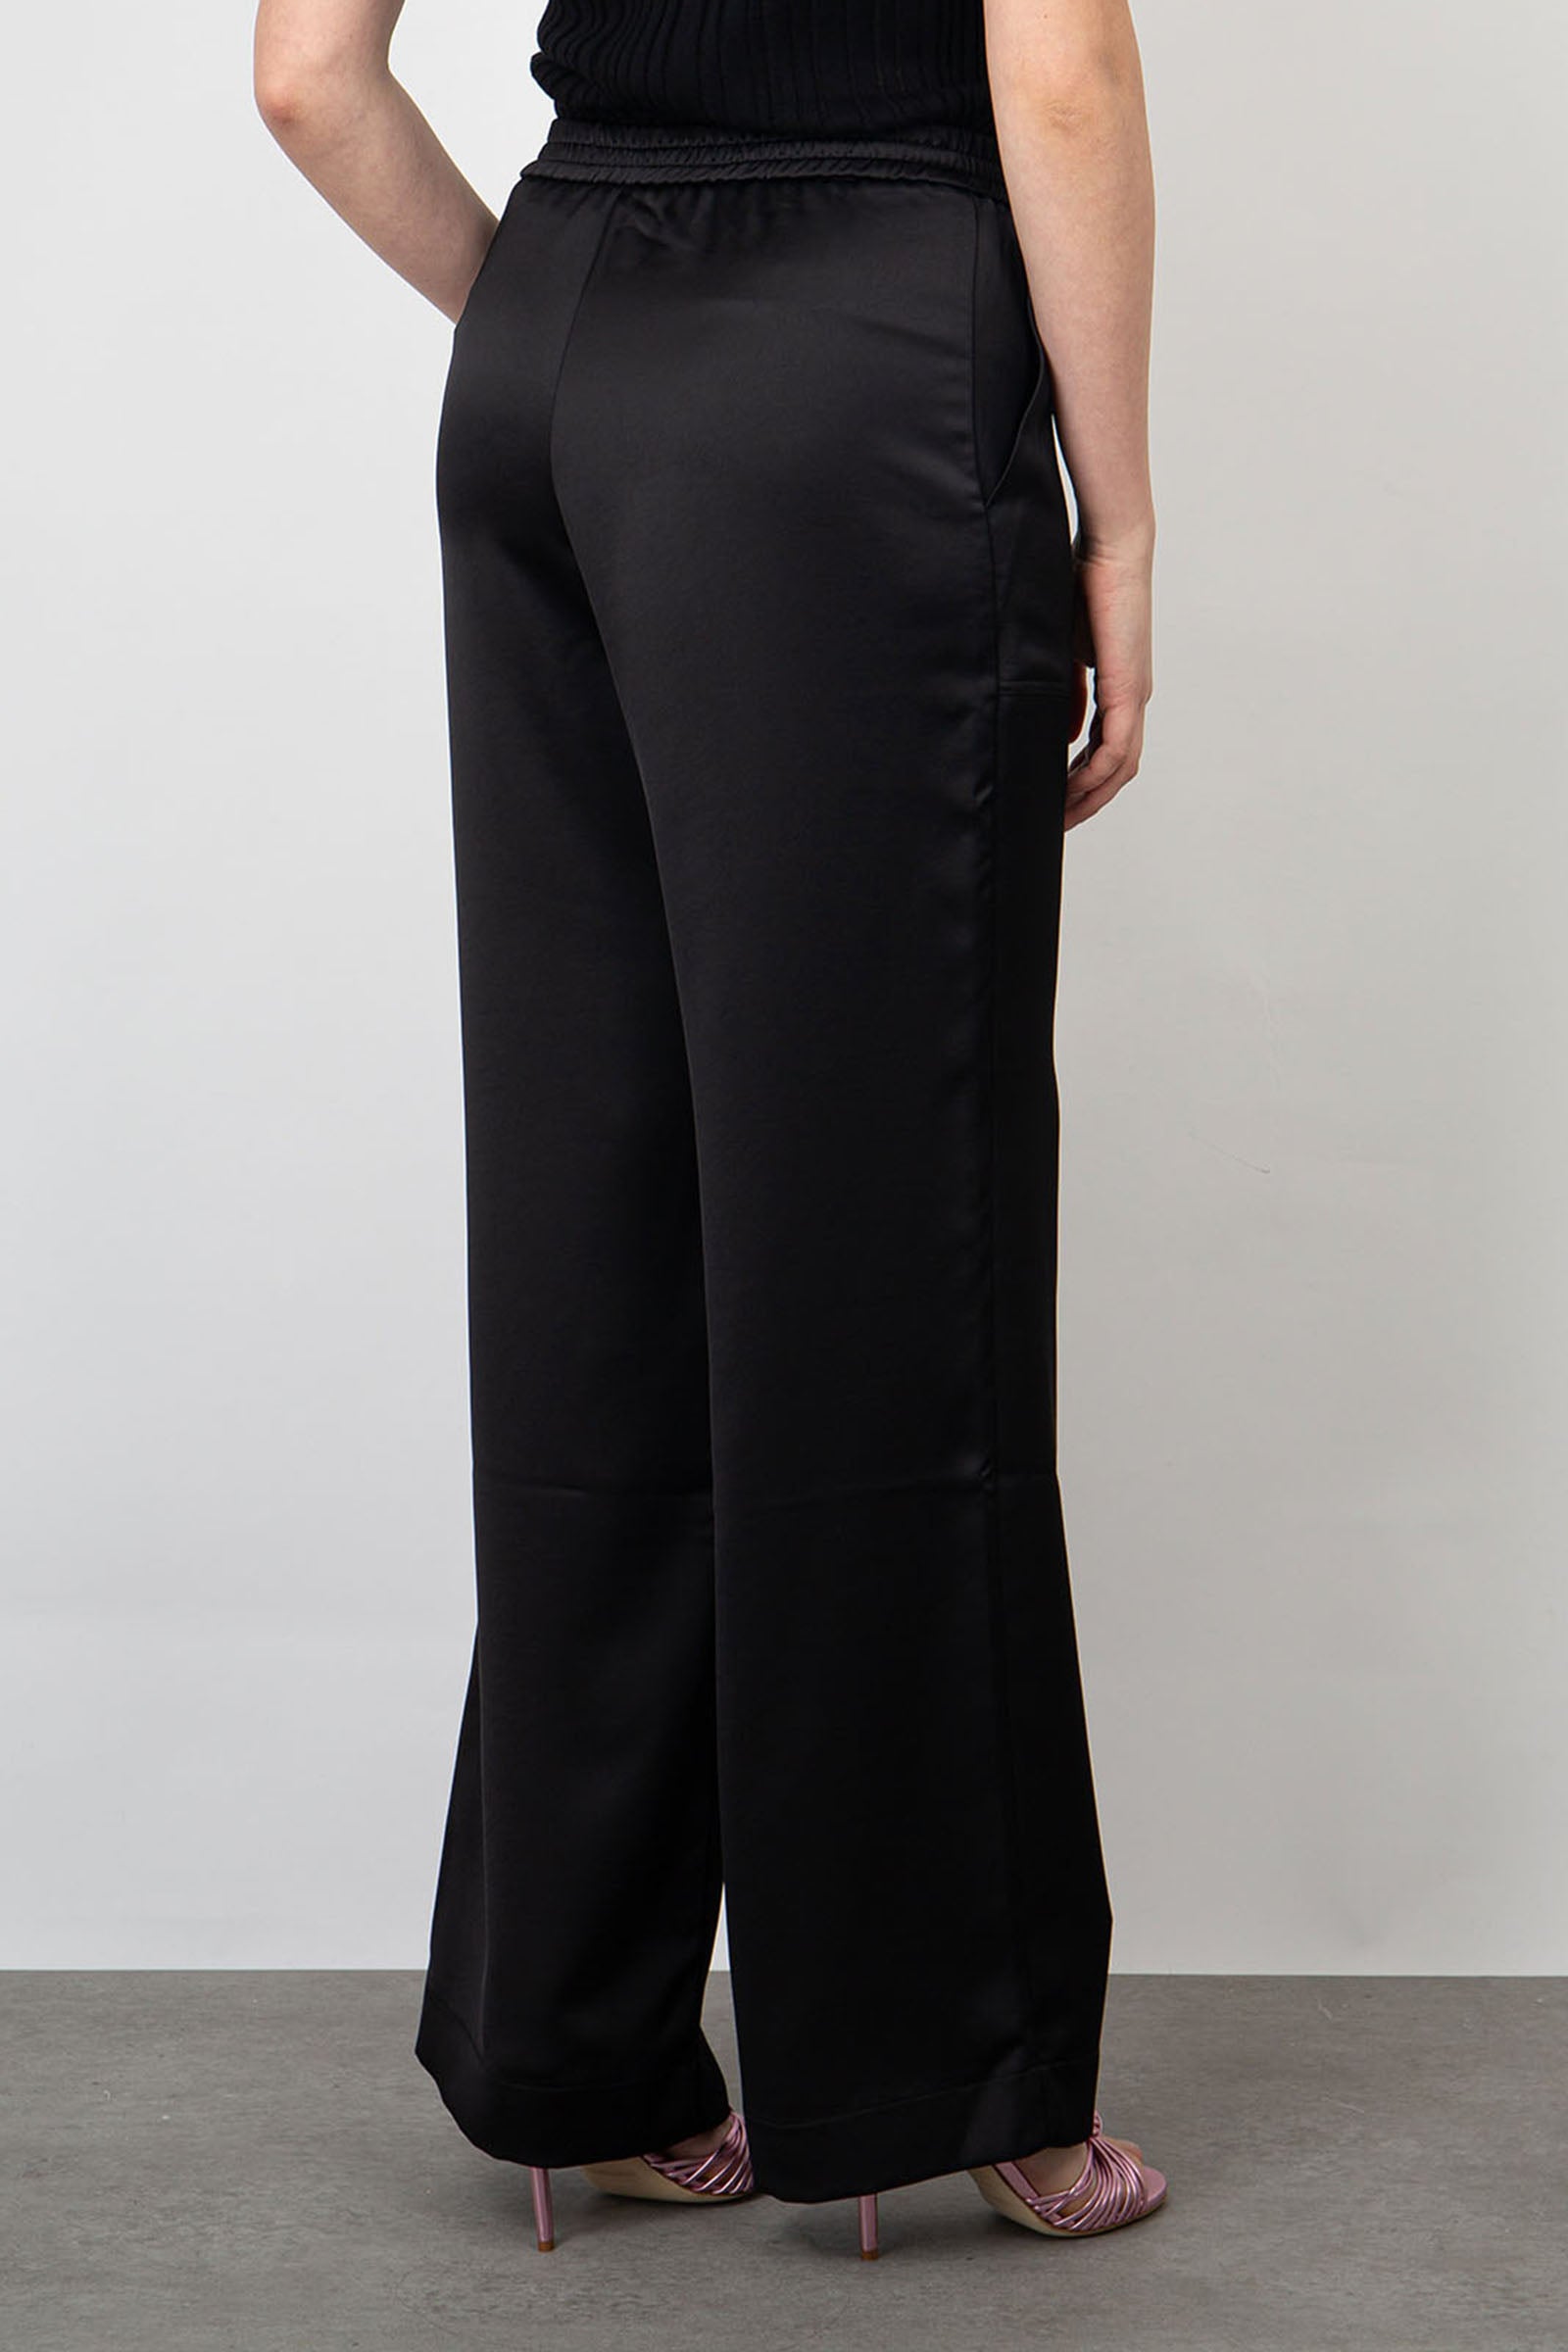 Roberto Collina Soft Satin Black Synthetic Trousers - 4